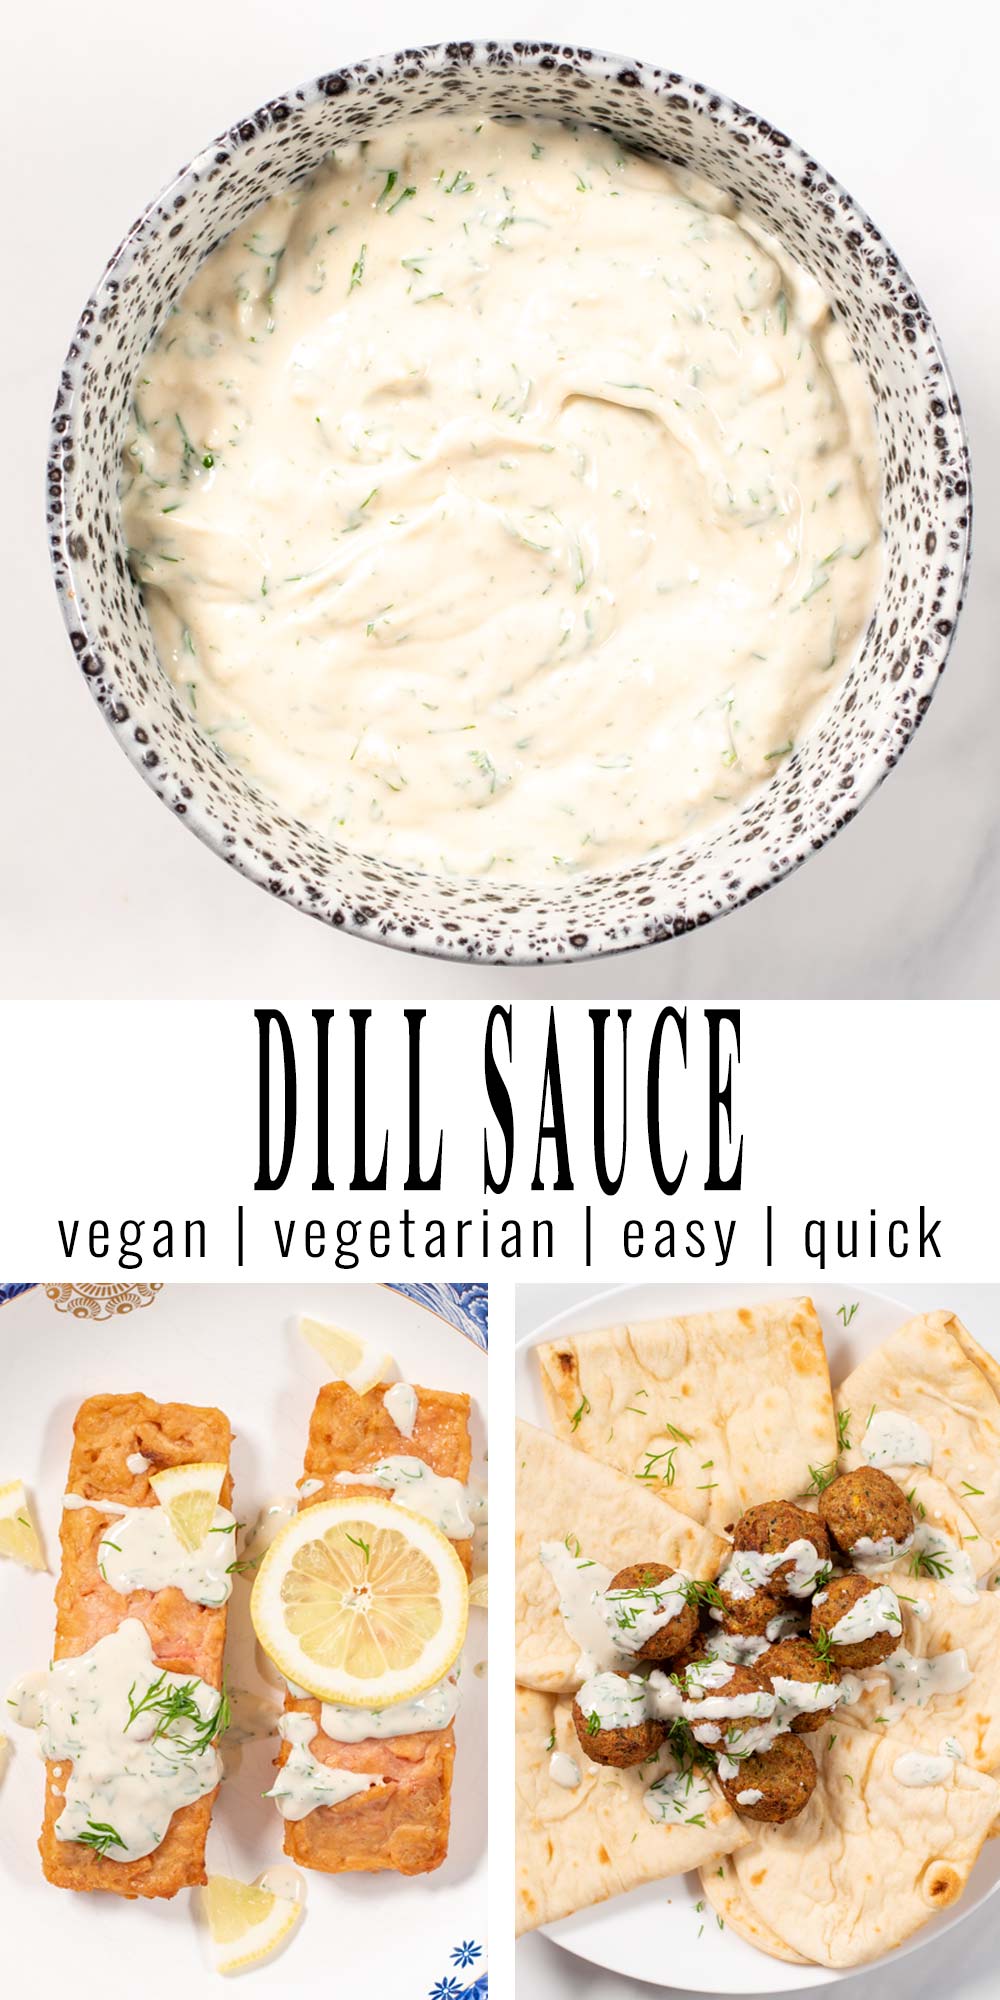 Collage of two pictures of Dill Sauce with recipe title text.